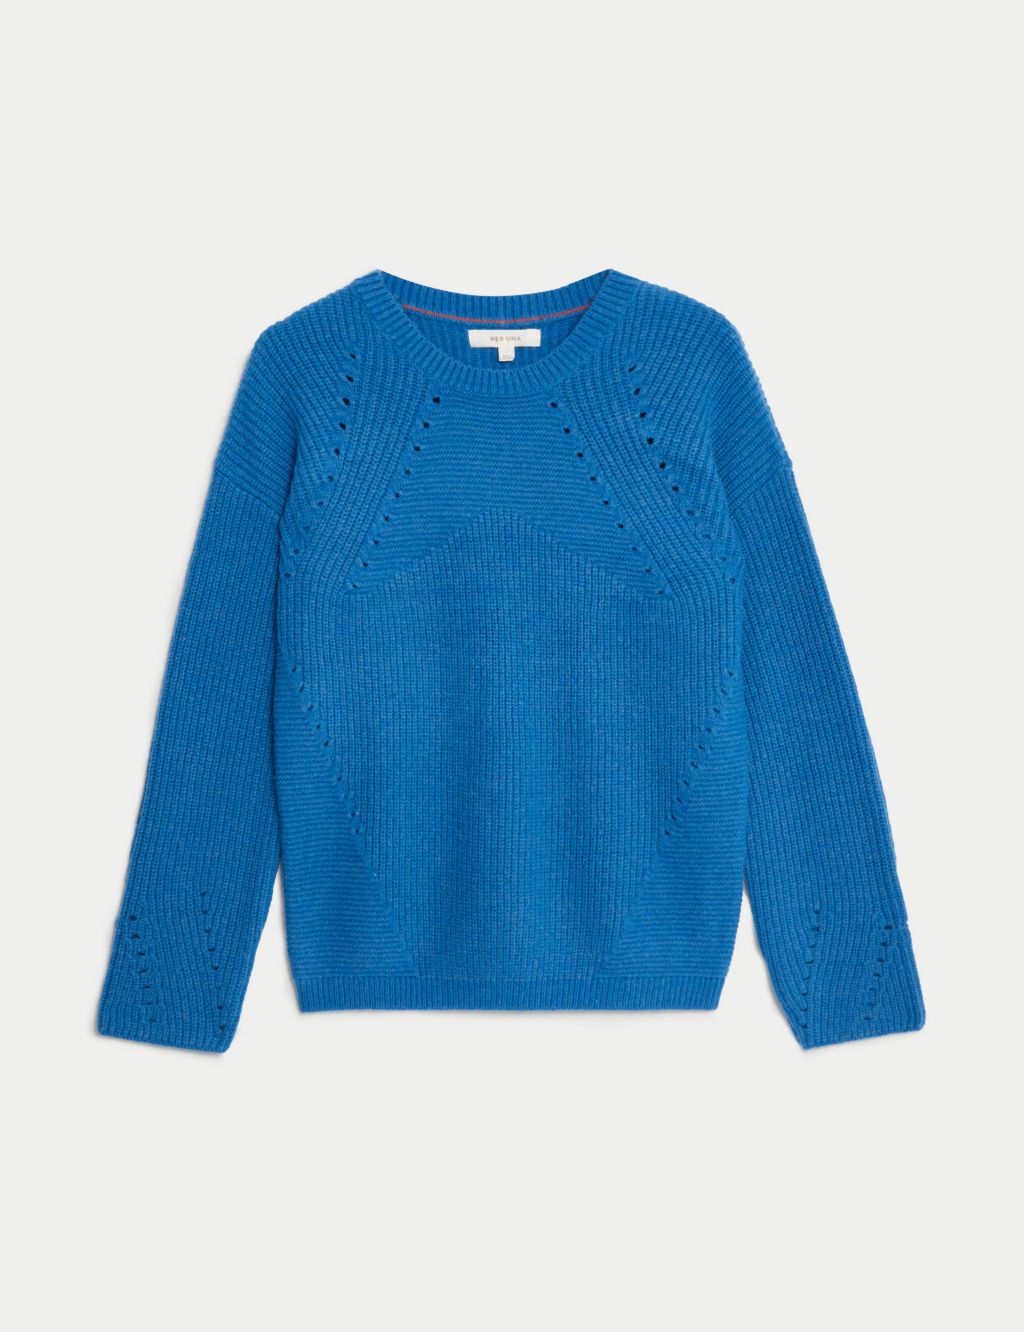 Pointelle Round Neck Jumper with Wool image 2